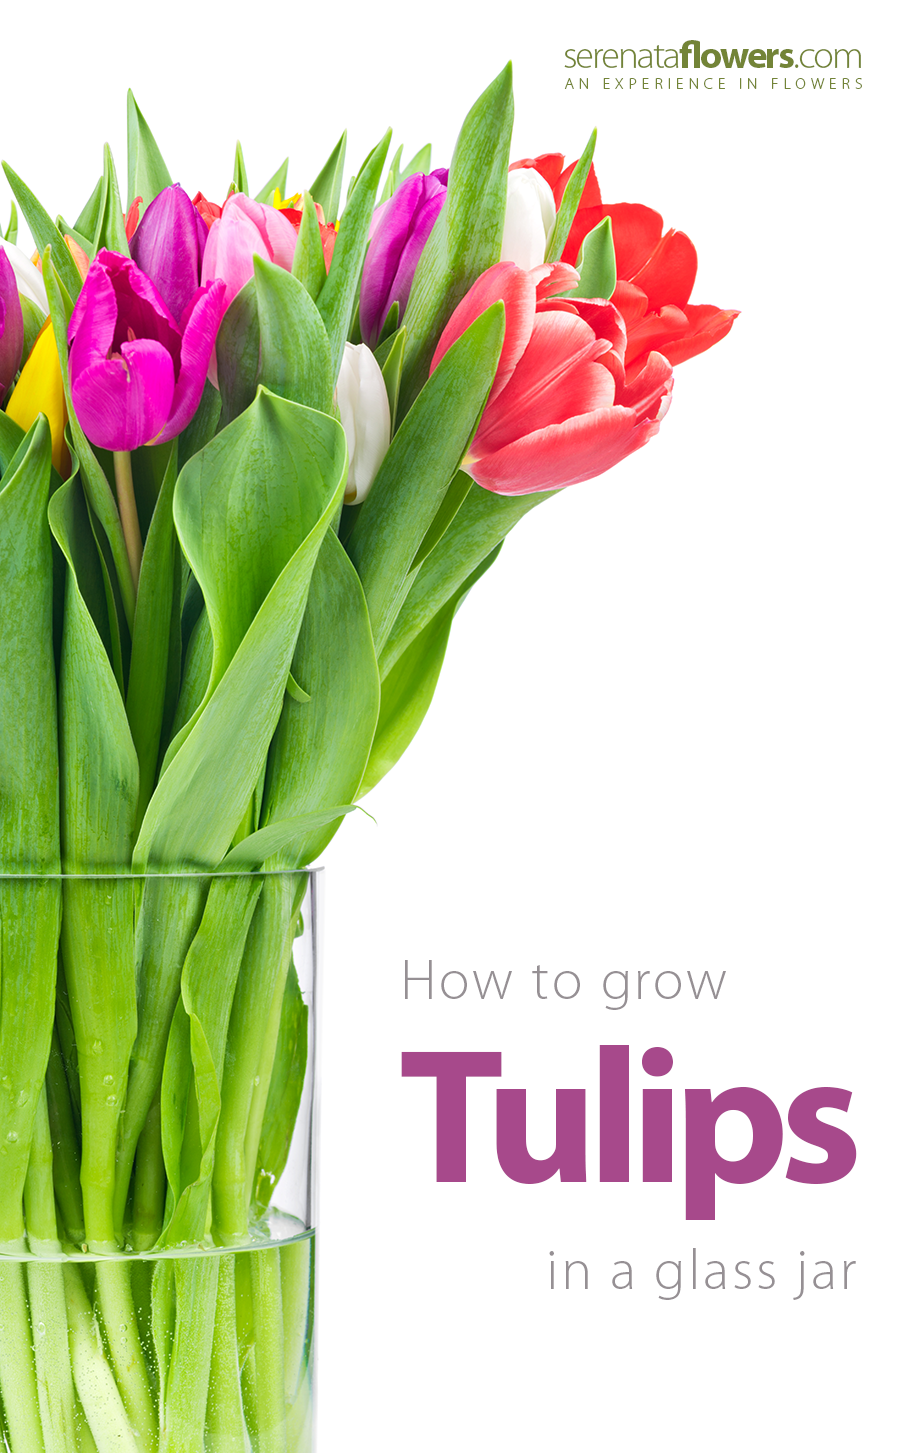 How to grow tulips in a glass jar